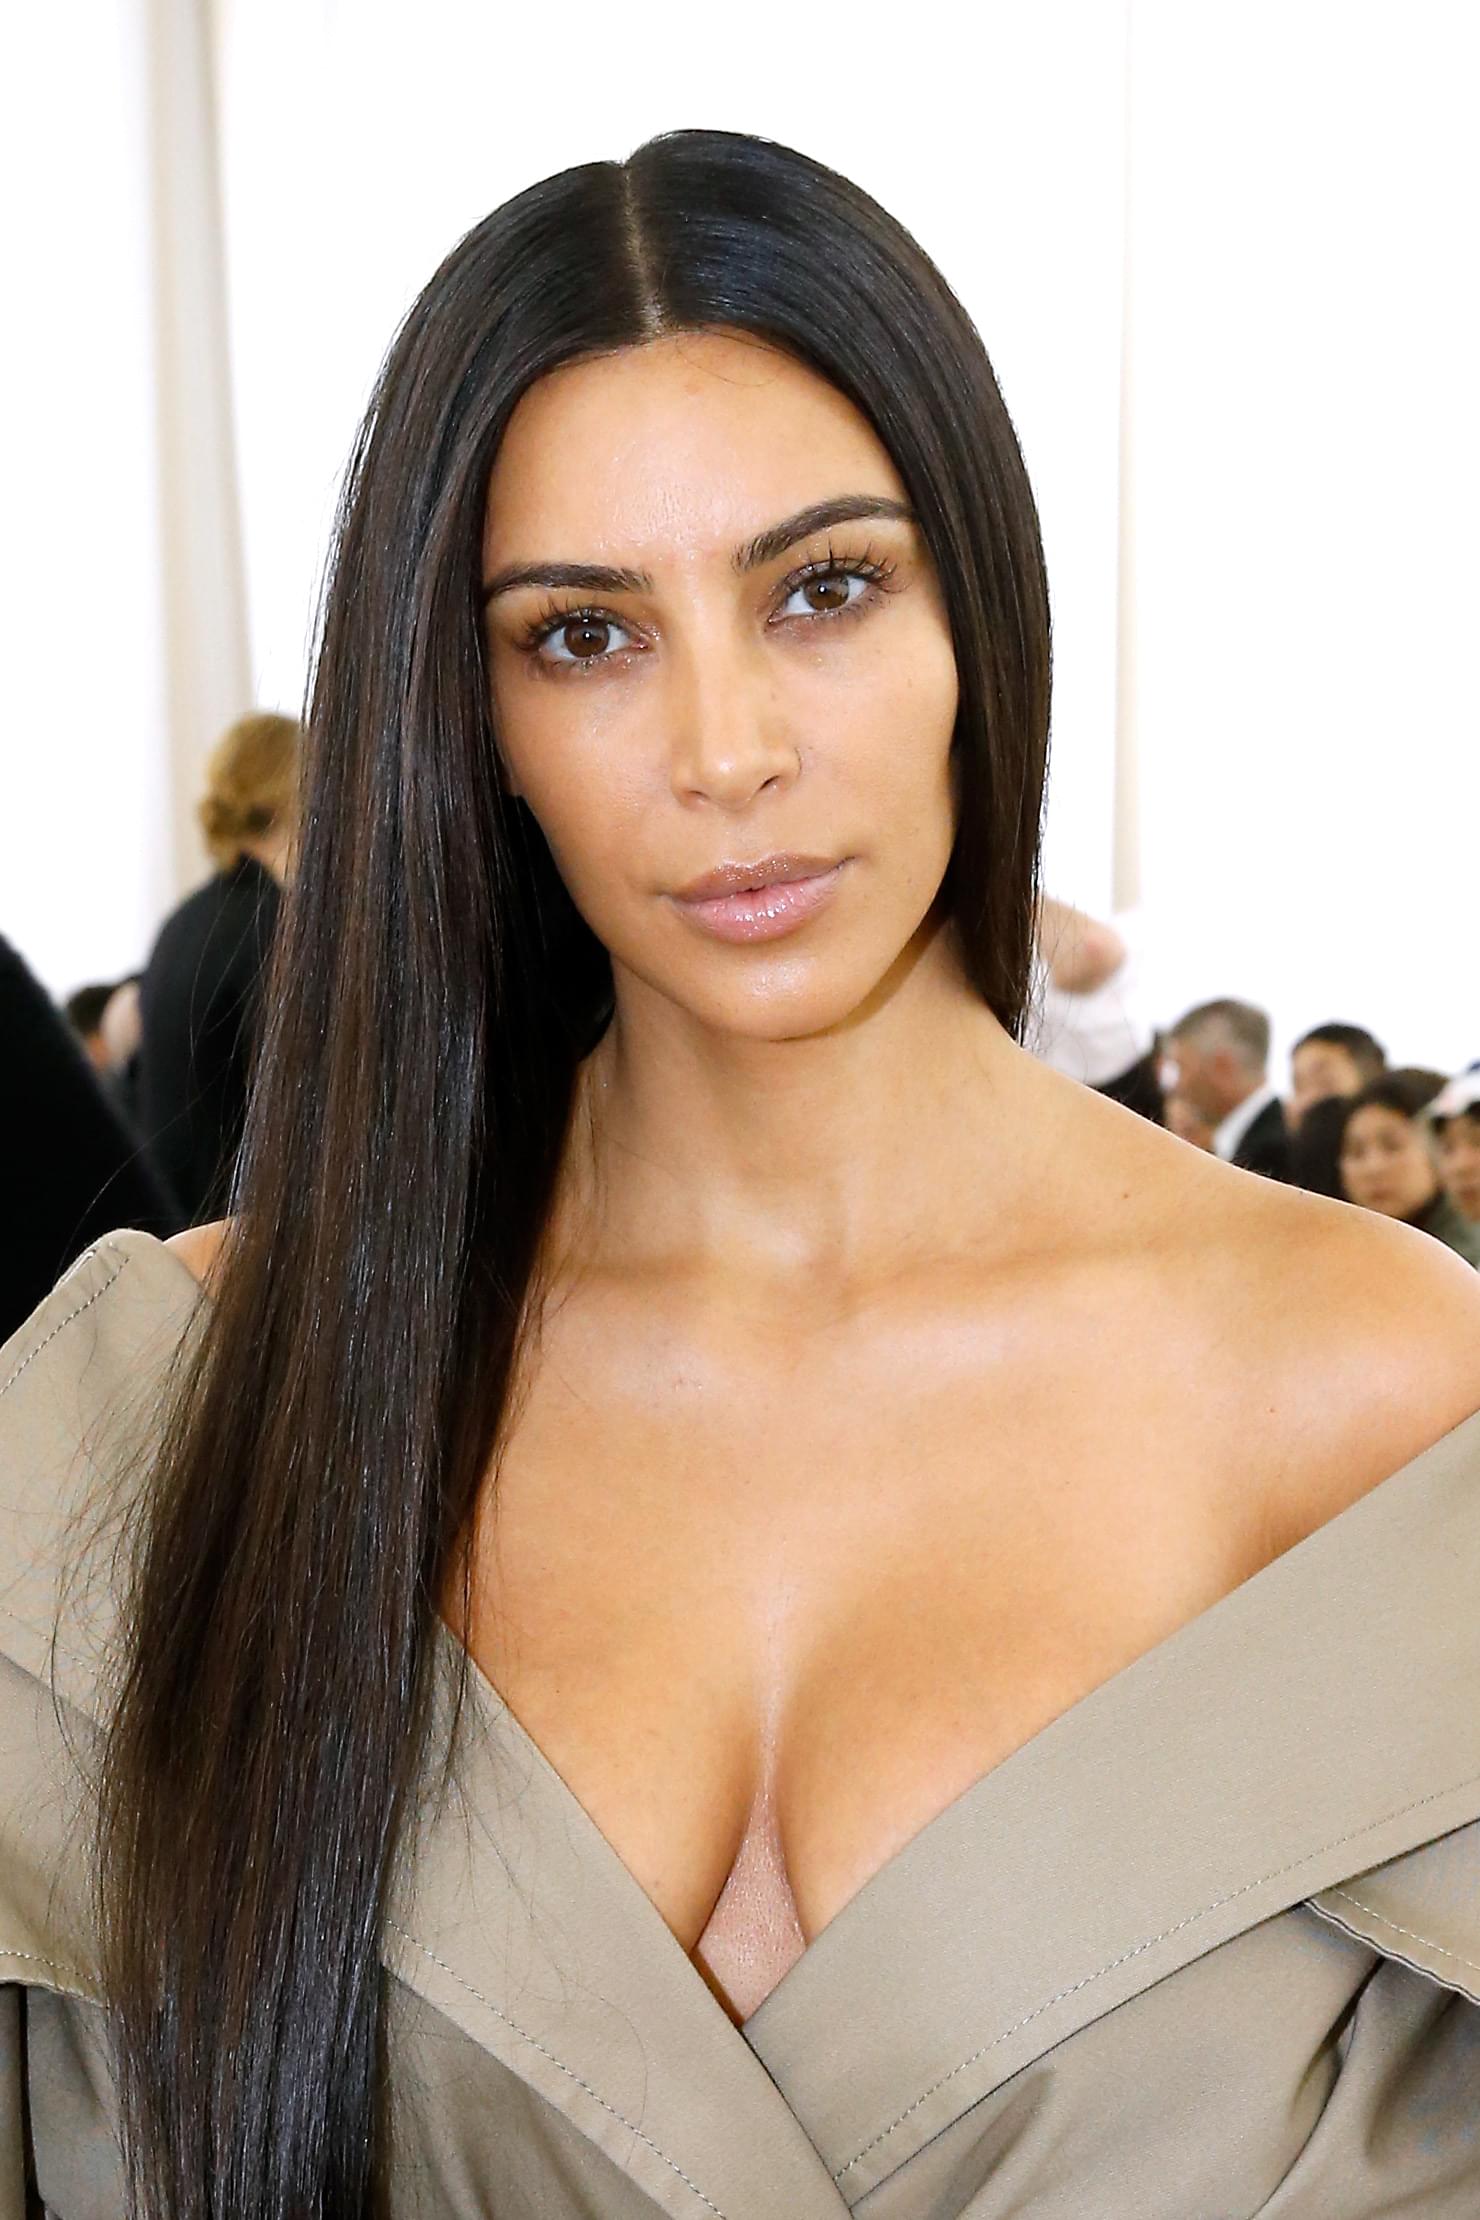 Kim Kardashian Gets Dragged On Twitter For Defending Friend’s Racist Past